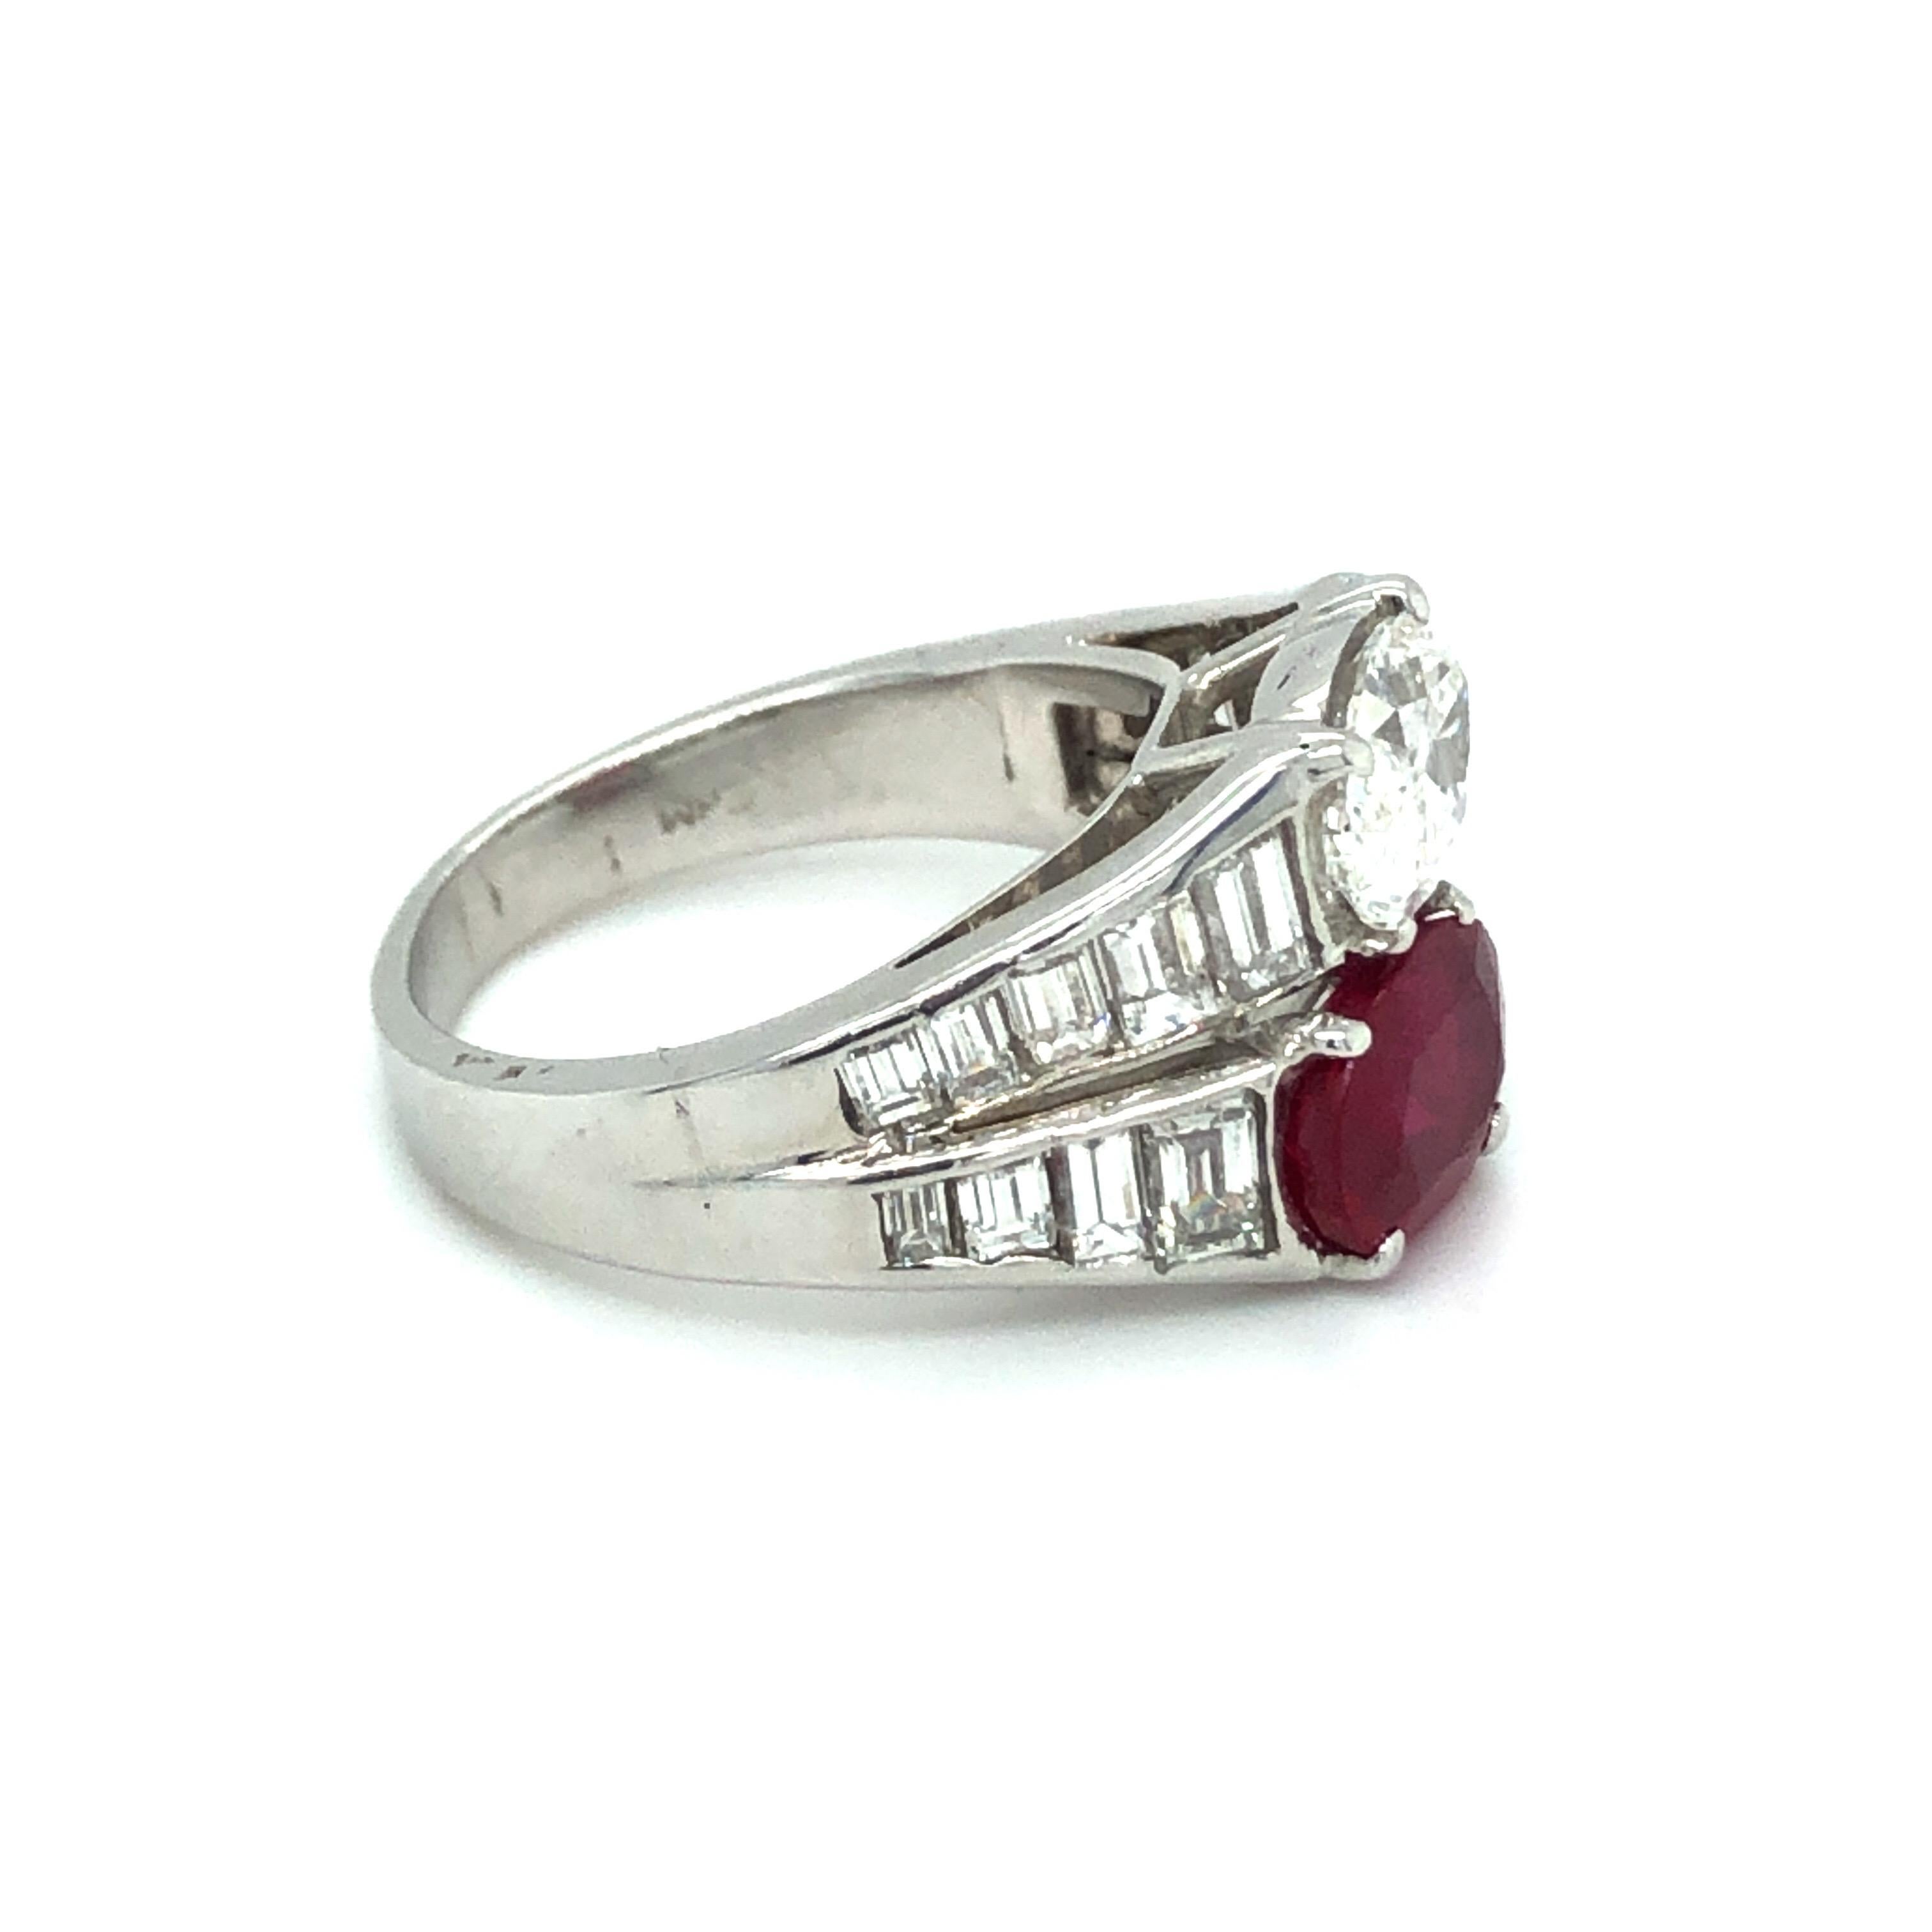 18 karat white gold Burma ruby and diamond Toi et Moi ring.
Elegant Toi et Moi ring in 18 karat white gold set with an oval unheated Burmese ruby of circa 2 carats and a lively oval diamond of 1.27 carats. The split shank is set with 18 baguette